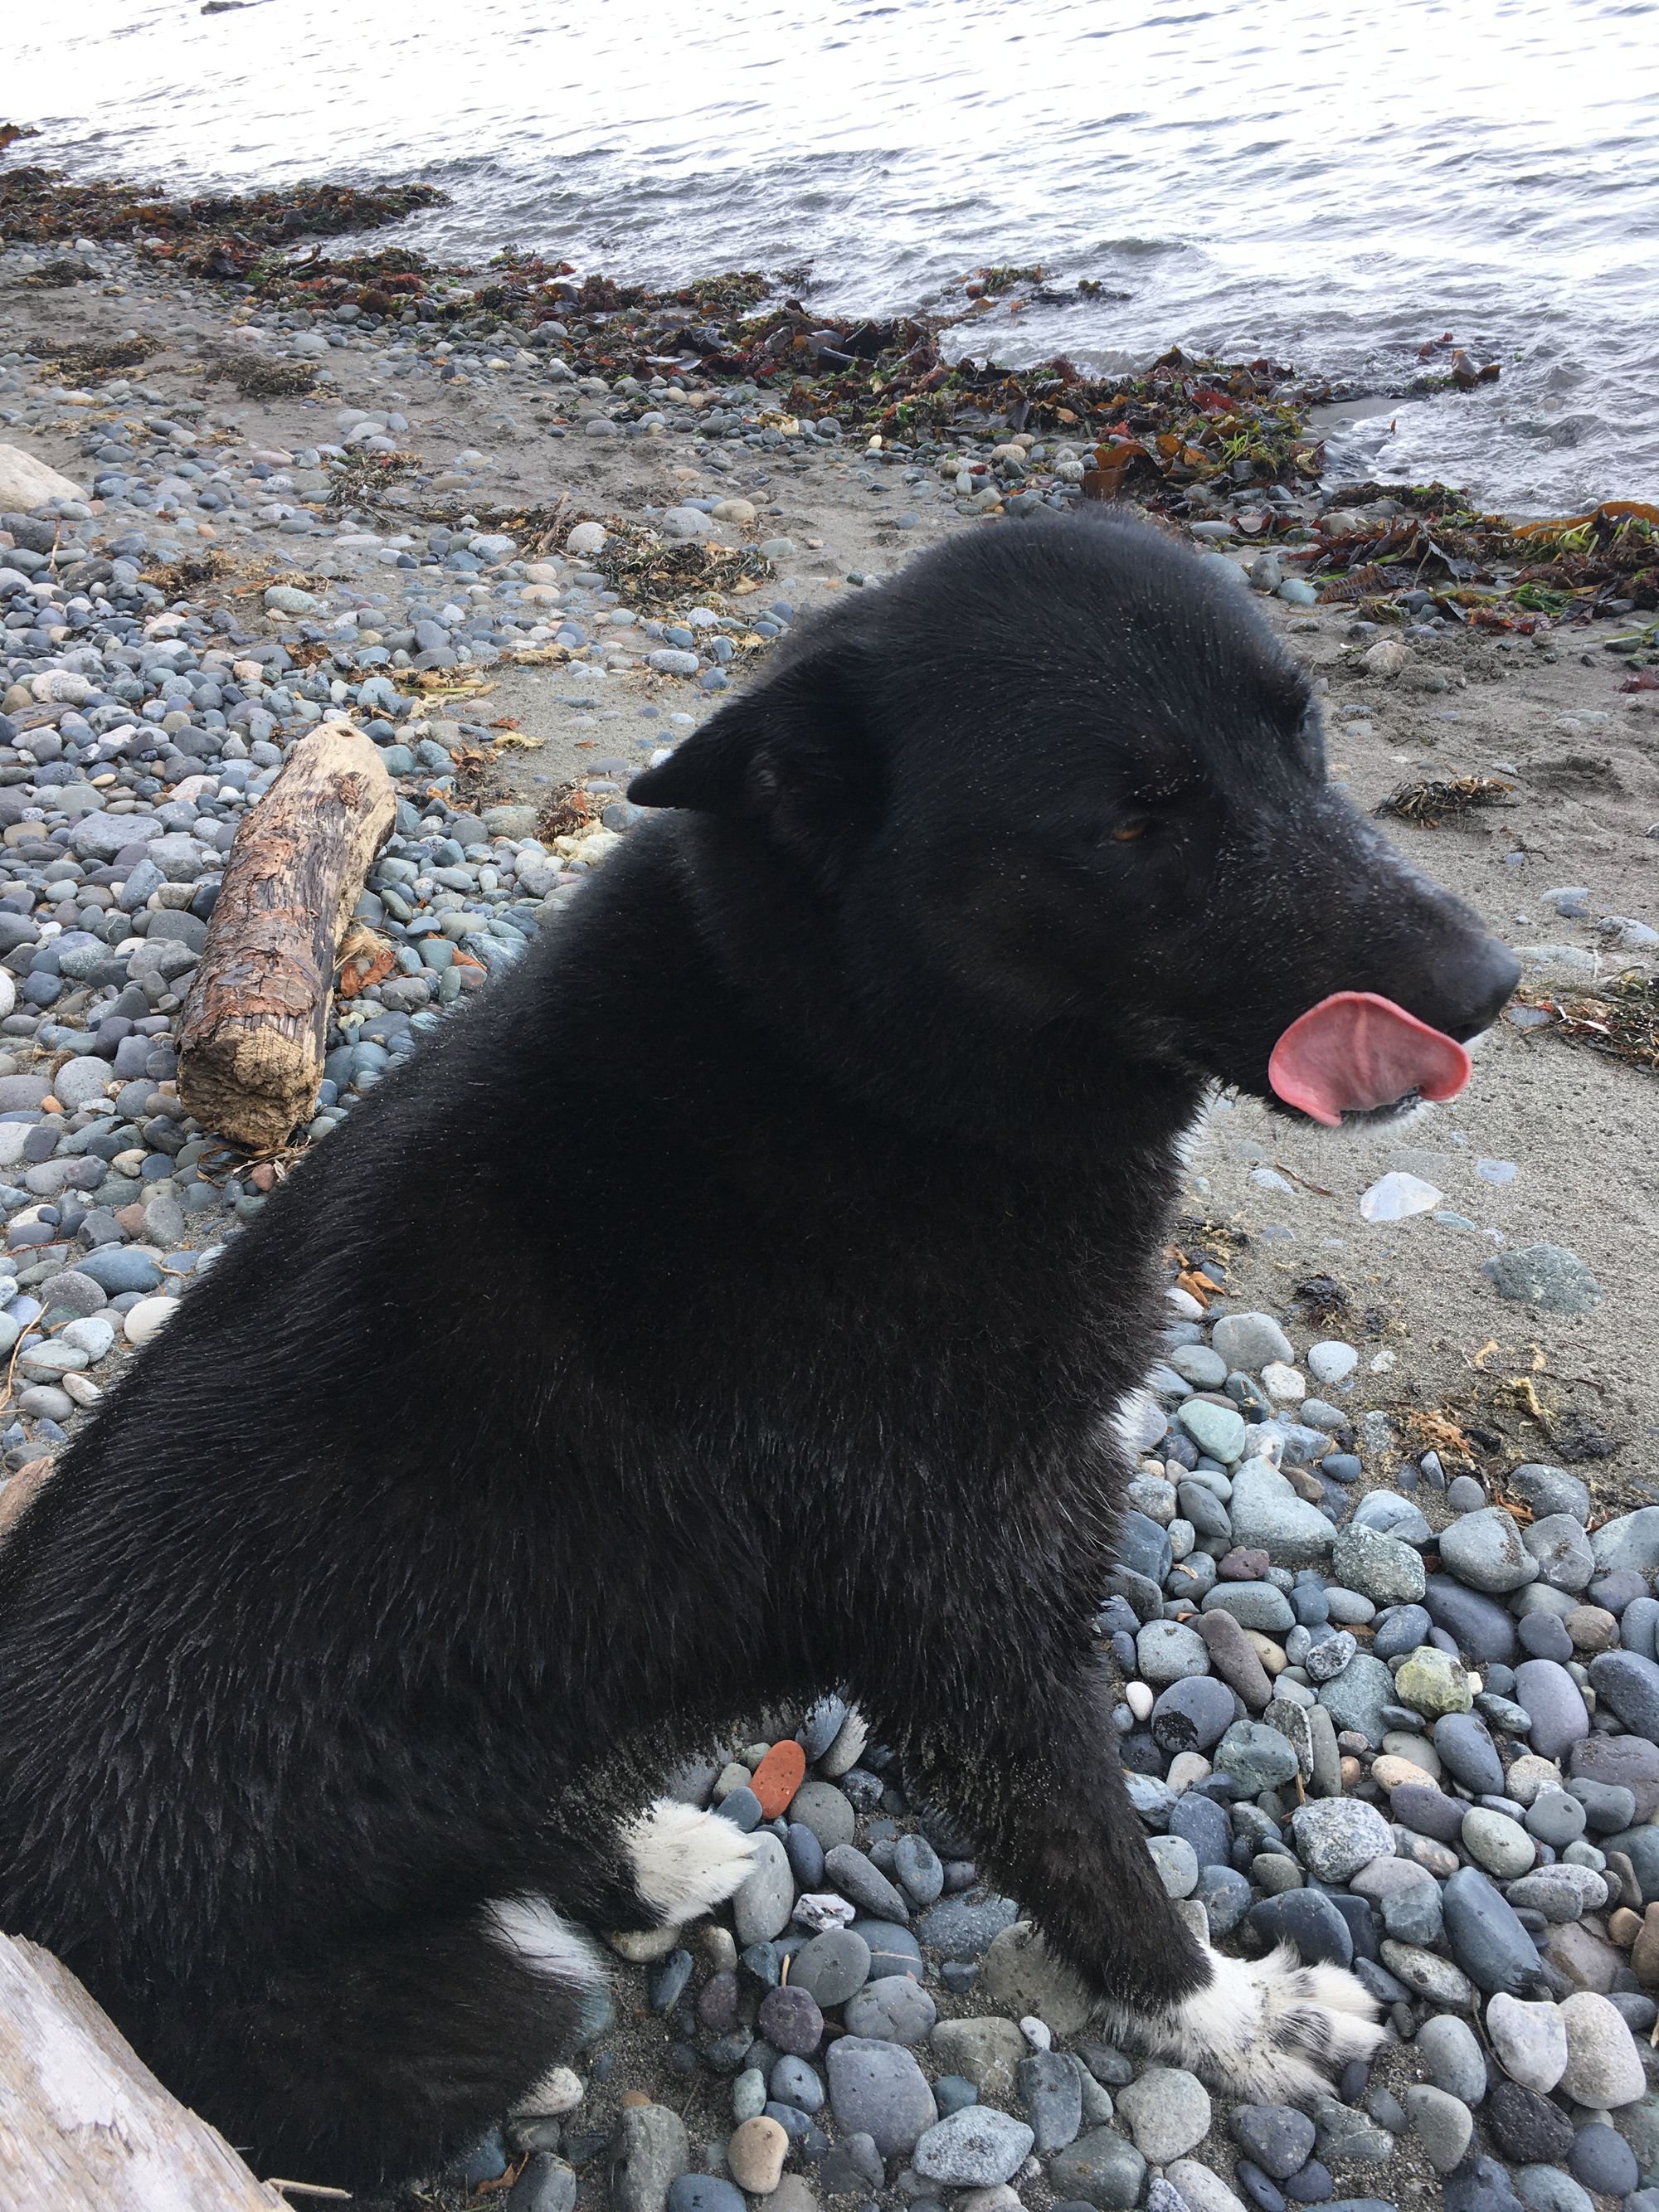 mostly black dog totally wet and sandy from head to toe with his tongue licking the tops of his lips. he sits on rocky beach with algae and a small piece of driftwood behind him at the water's edge.